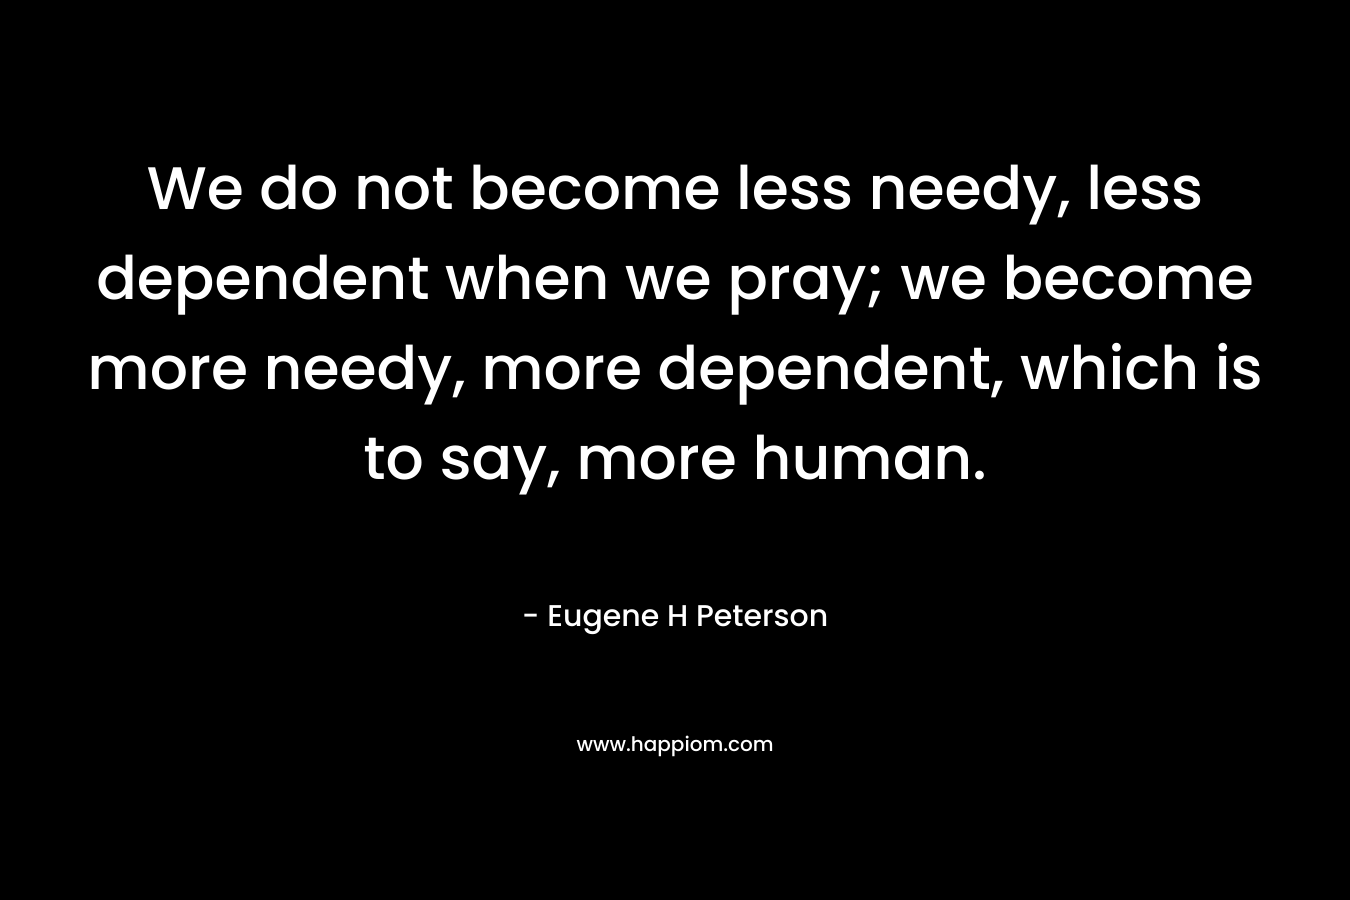 We do not become less needy, less dependent when we pray; we become more needy, more dependent, which is to say, more human. – Eugene H Peterson